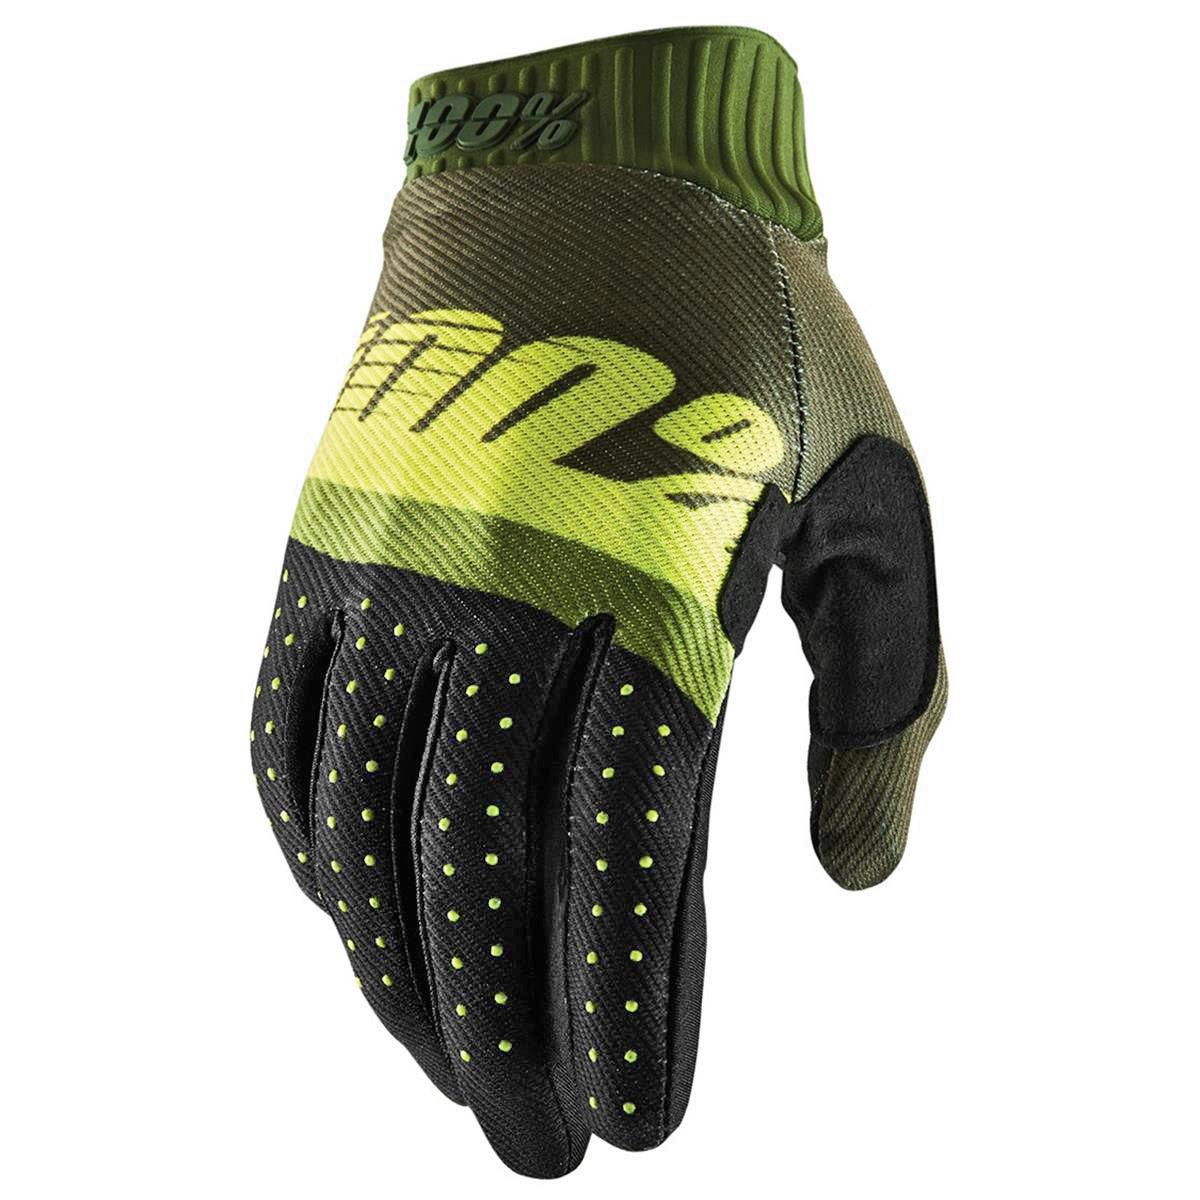 100% Bike Gloves Ridefit Army Green/Fluo Lime/Fatigue